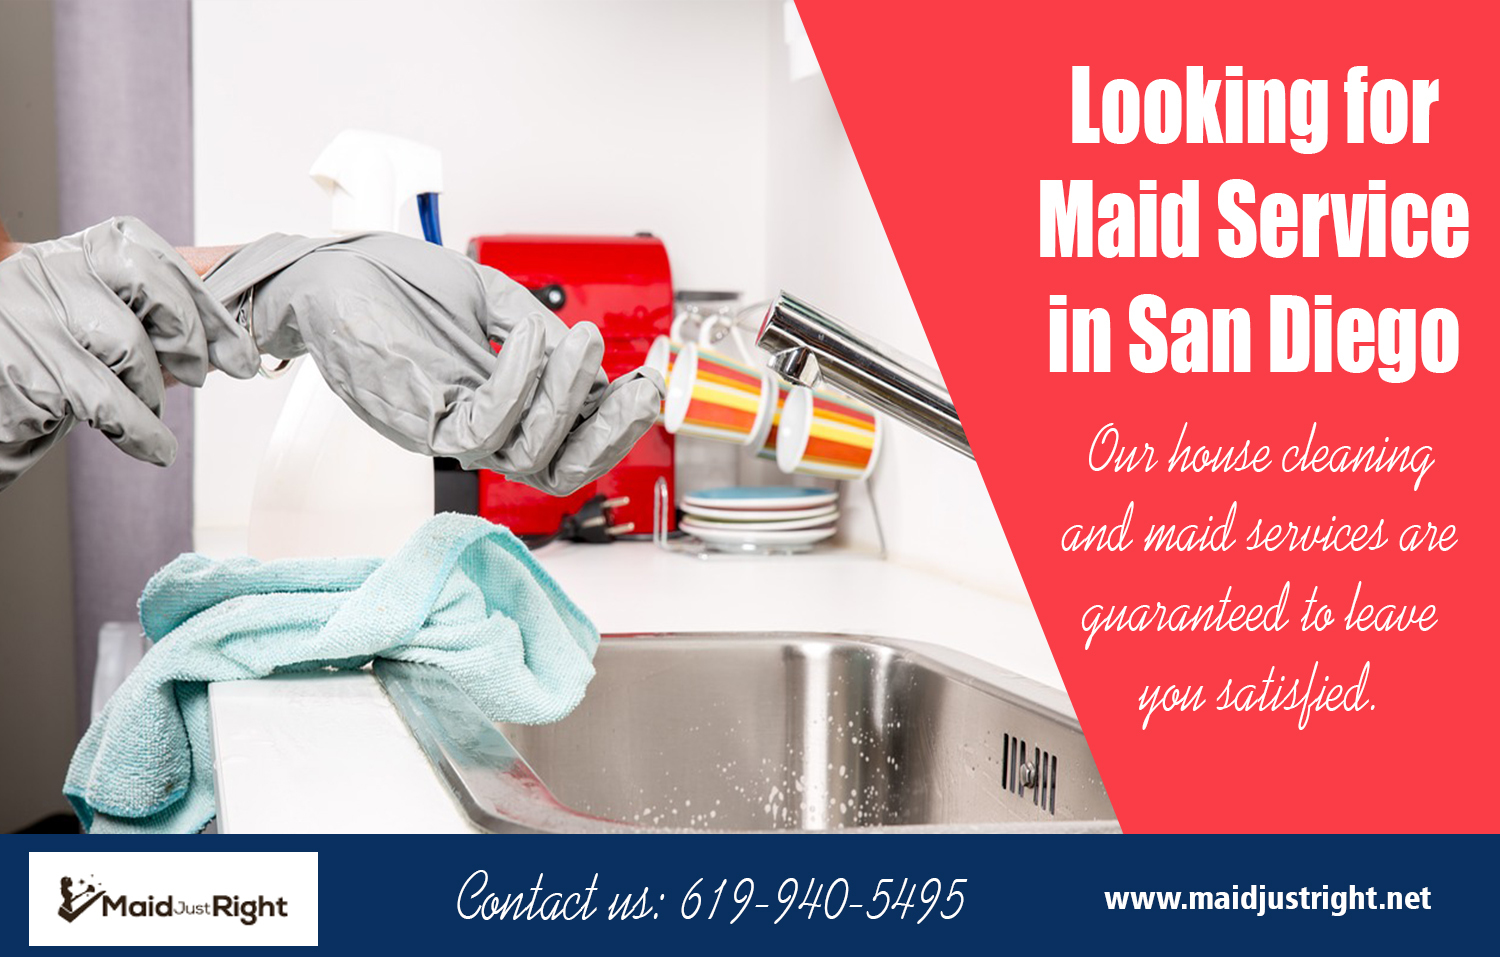 Looking For Maid Service In San Diego | Call Us - 619-940-5495 | maidjustright.net